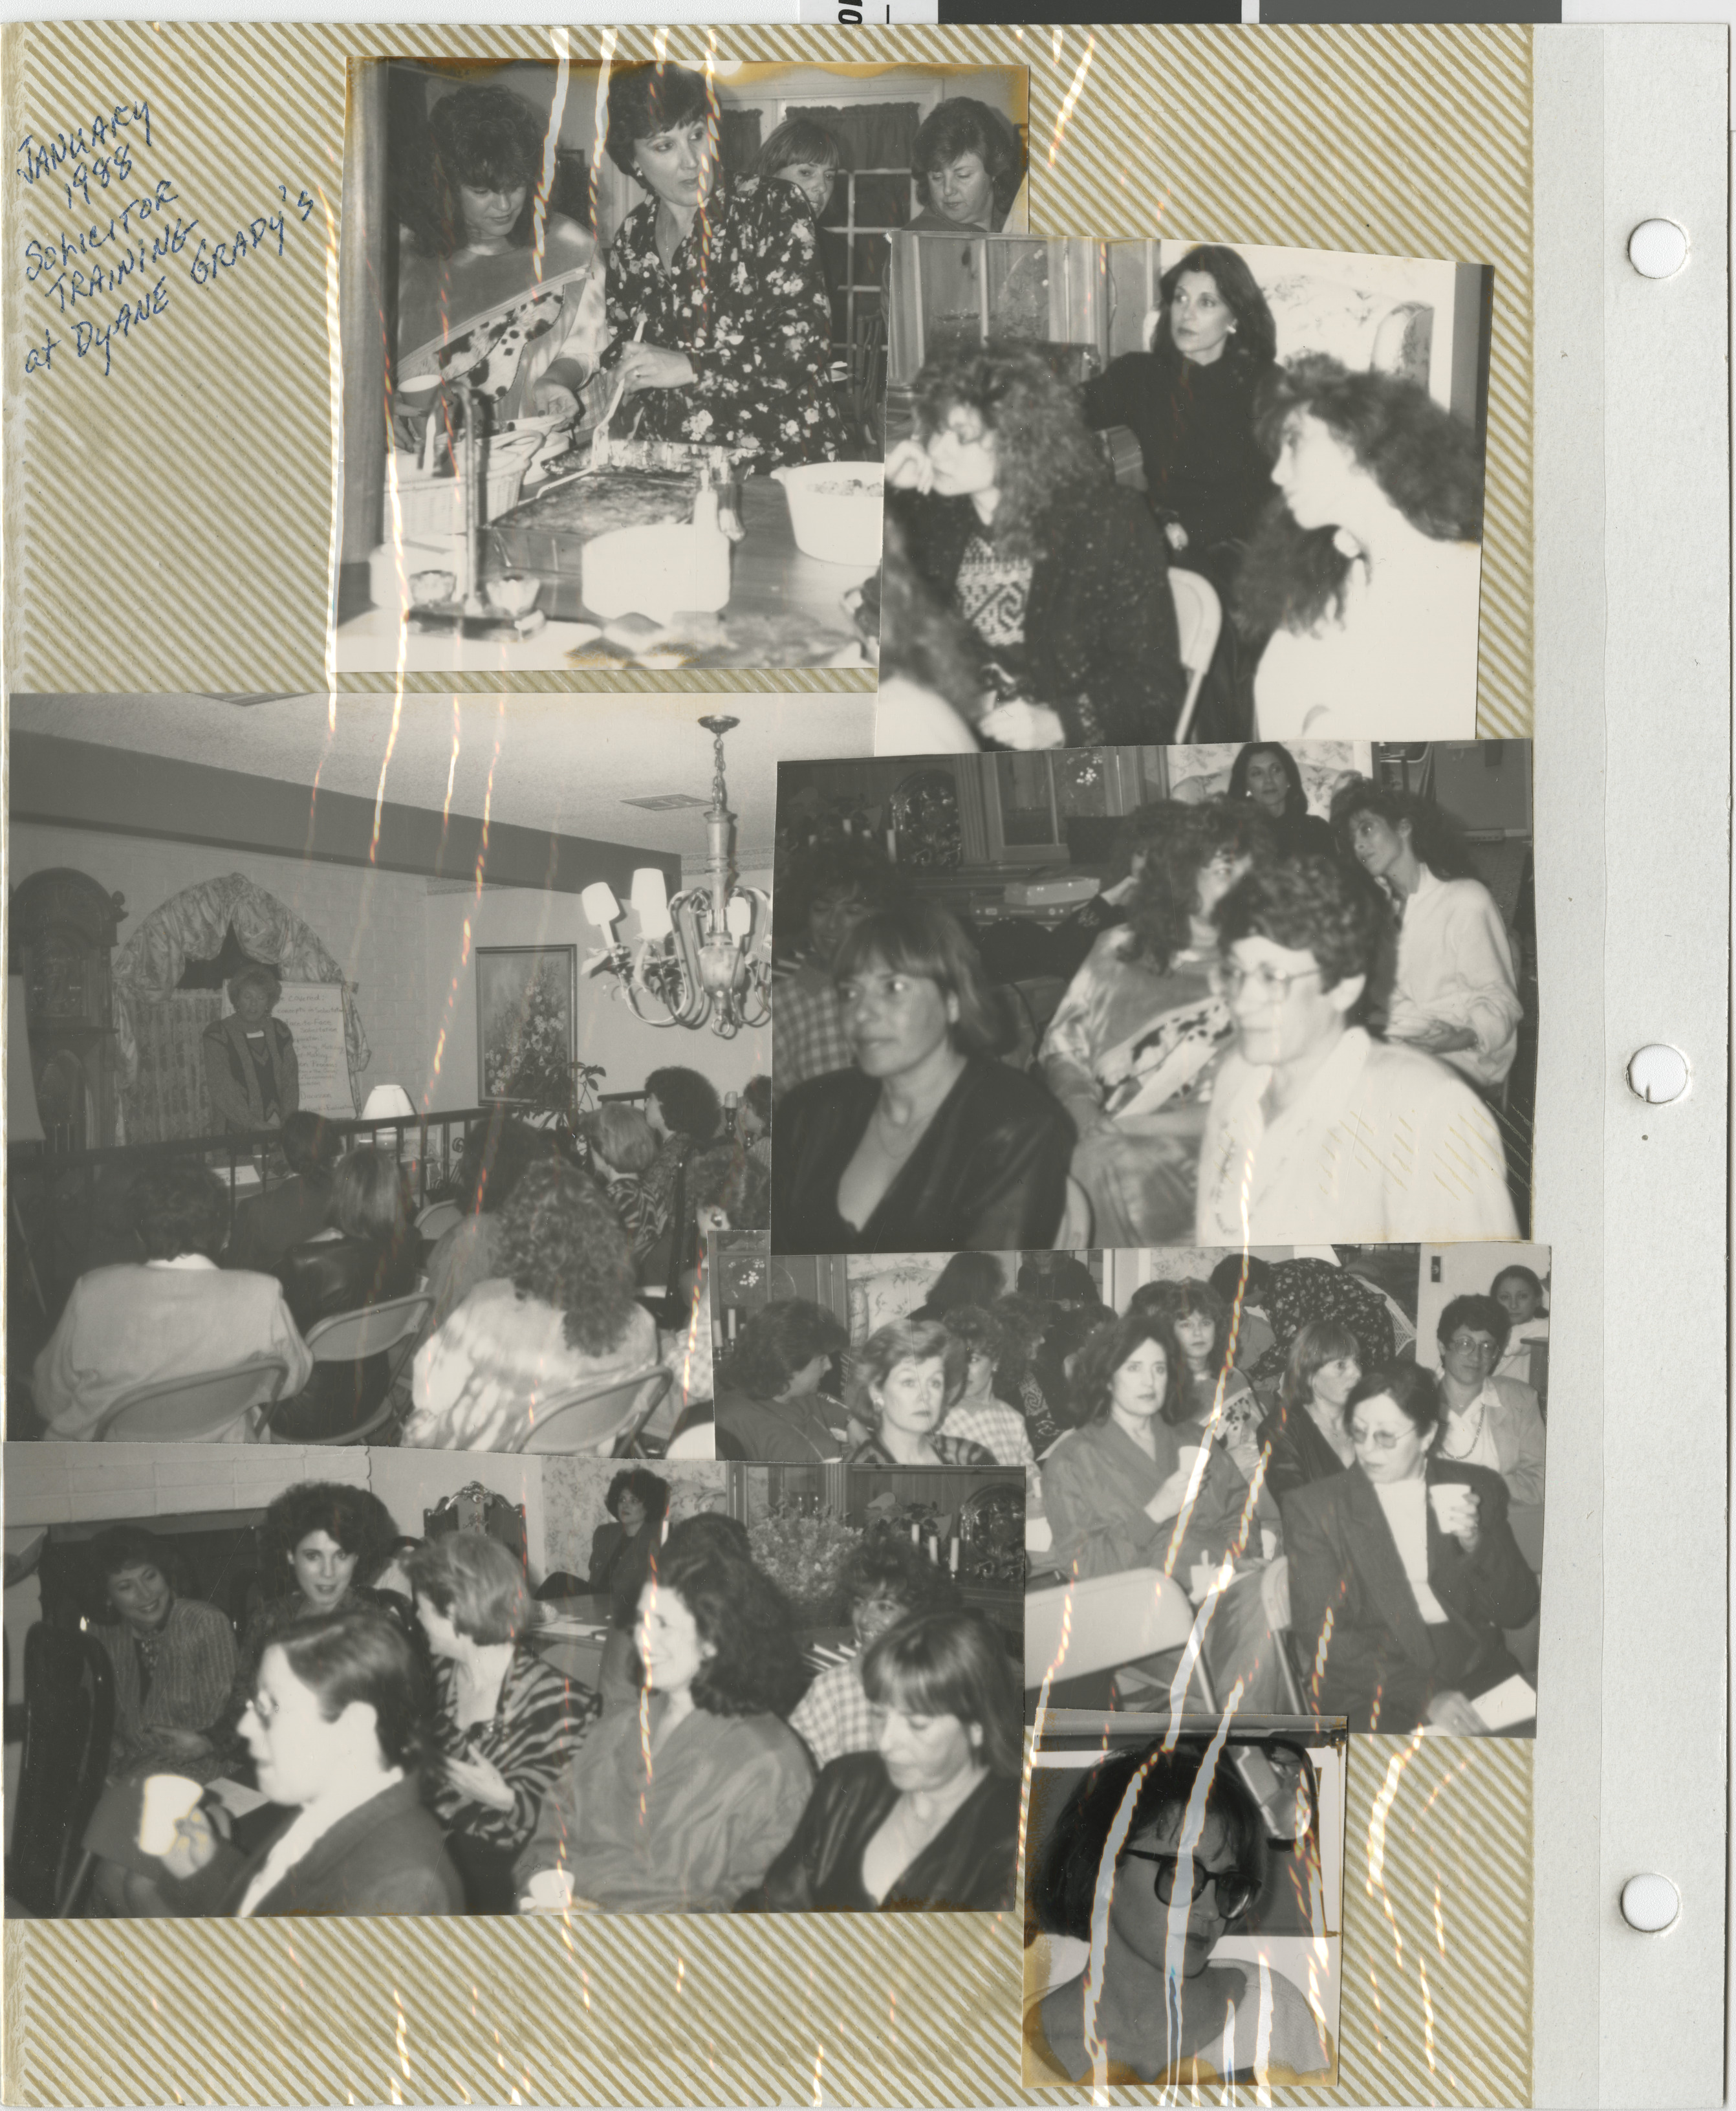 Photo album page: Solicitor training, January 1988, at Dyane Grady's